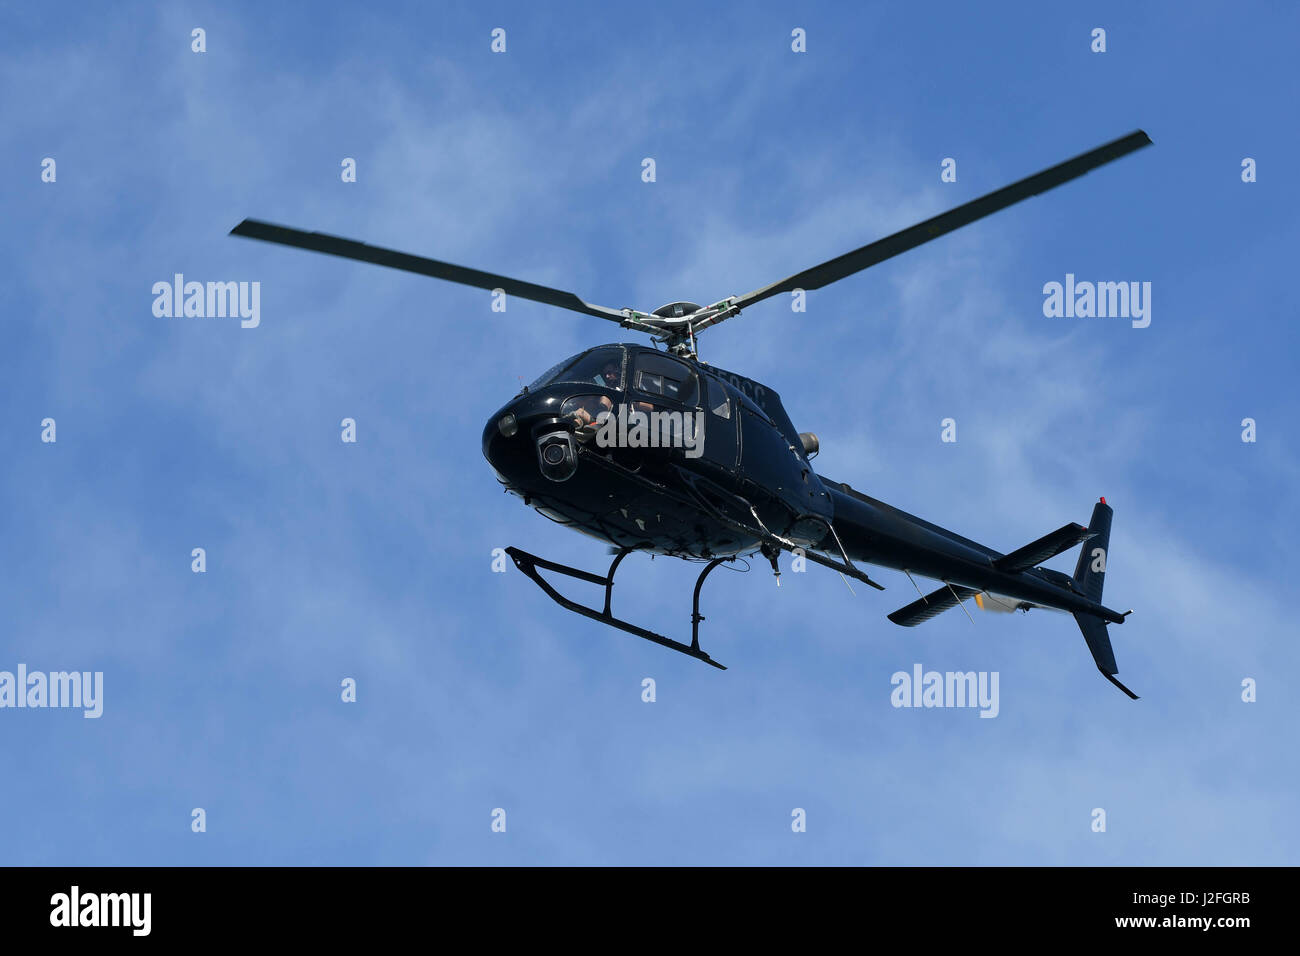 San Diego, USA - April 16, 2017: Control helicopter on display during the Red Bull Air Race World Championship. Stock Photo